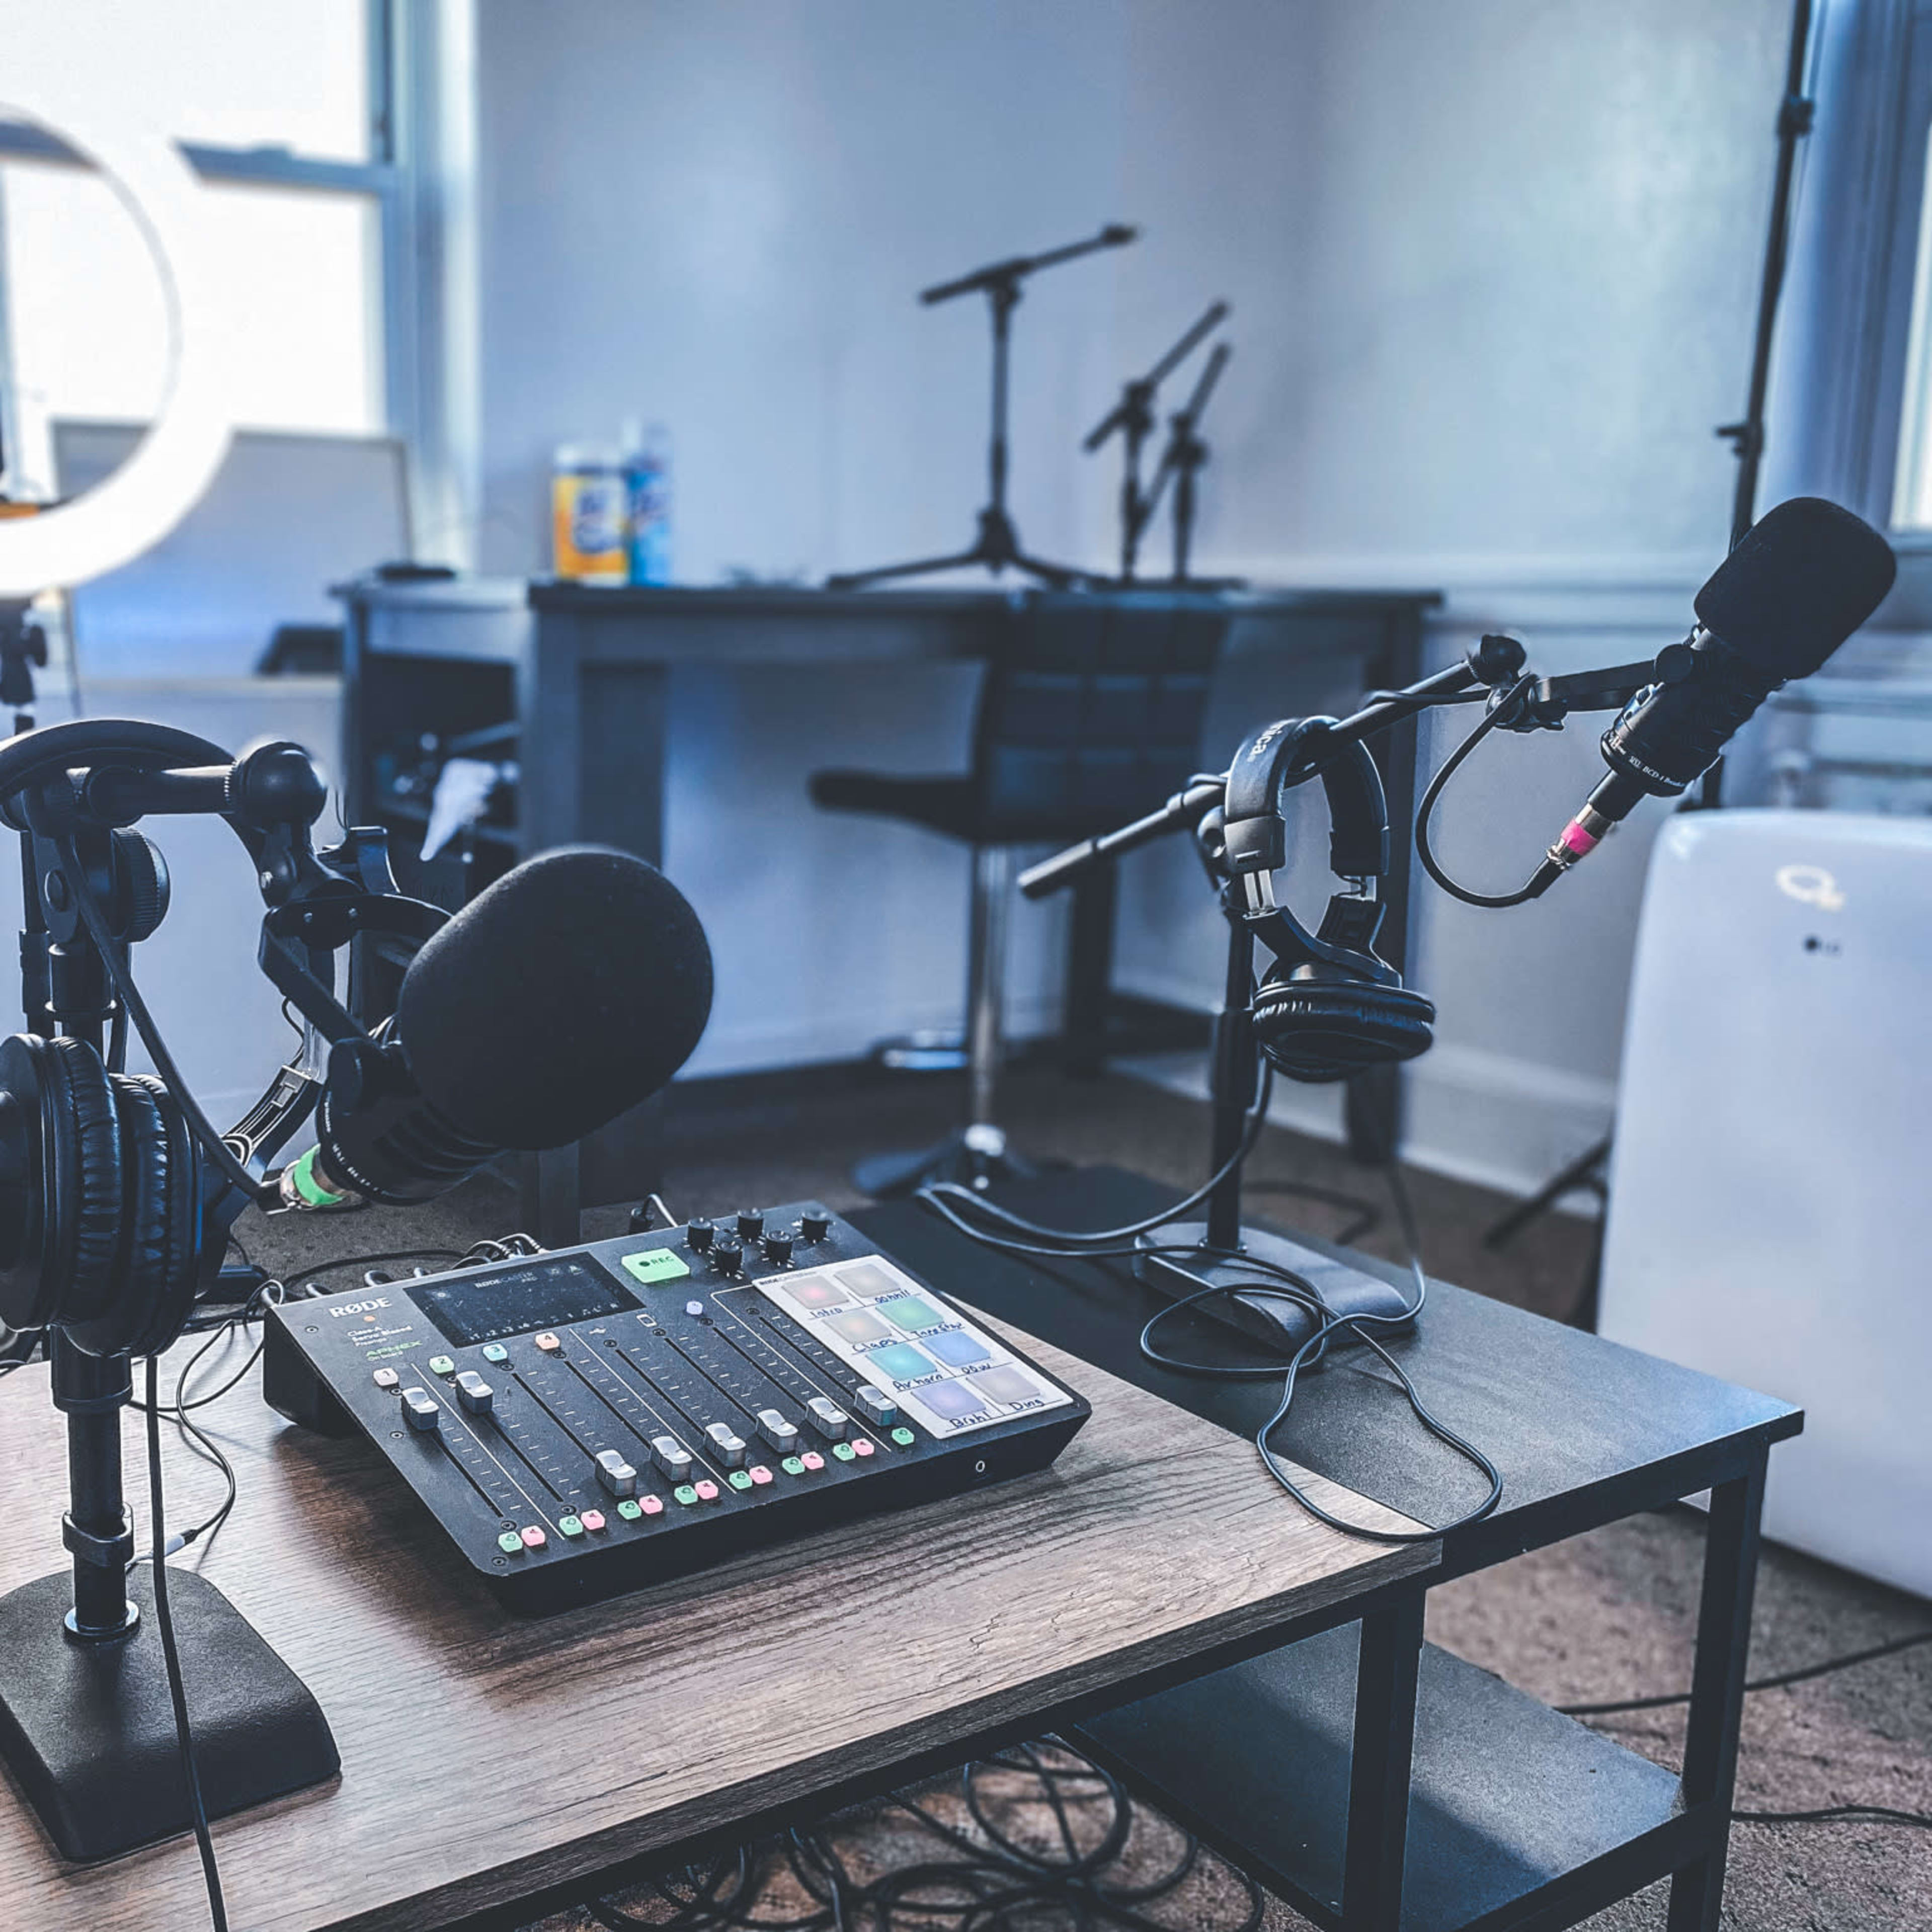 Podcast Studio Setup: Everything You Need to Record a Podcast